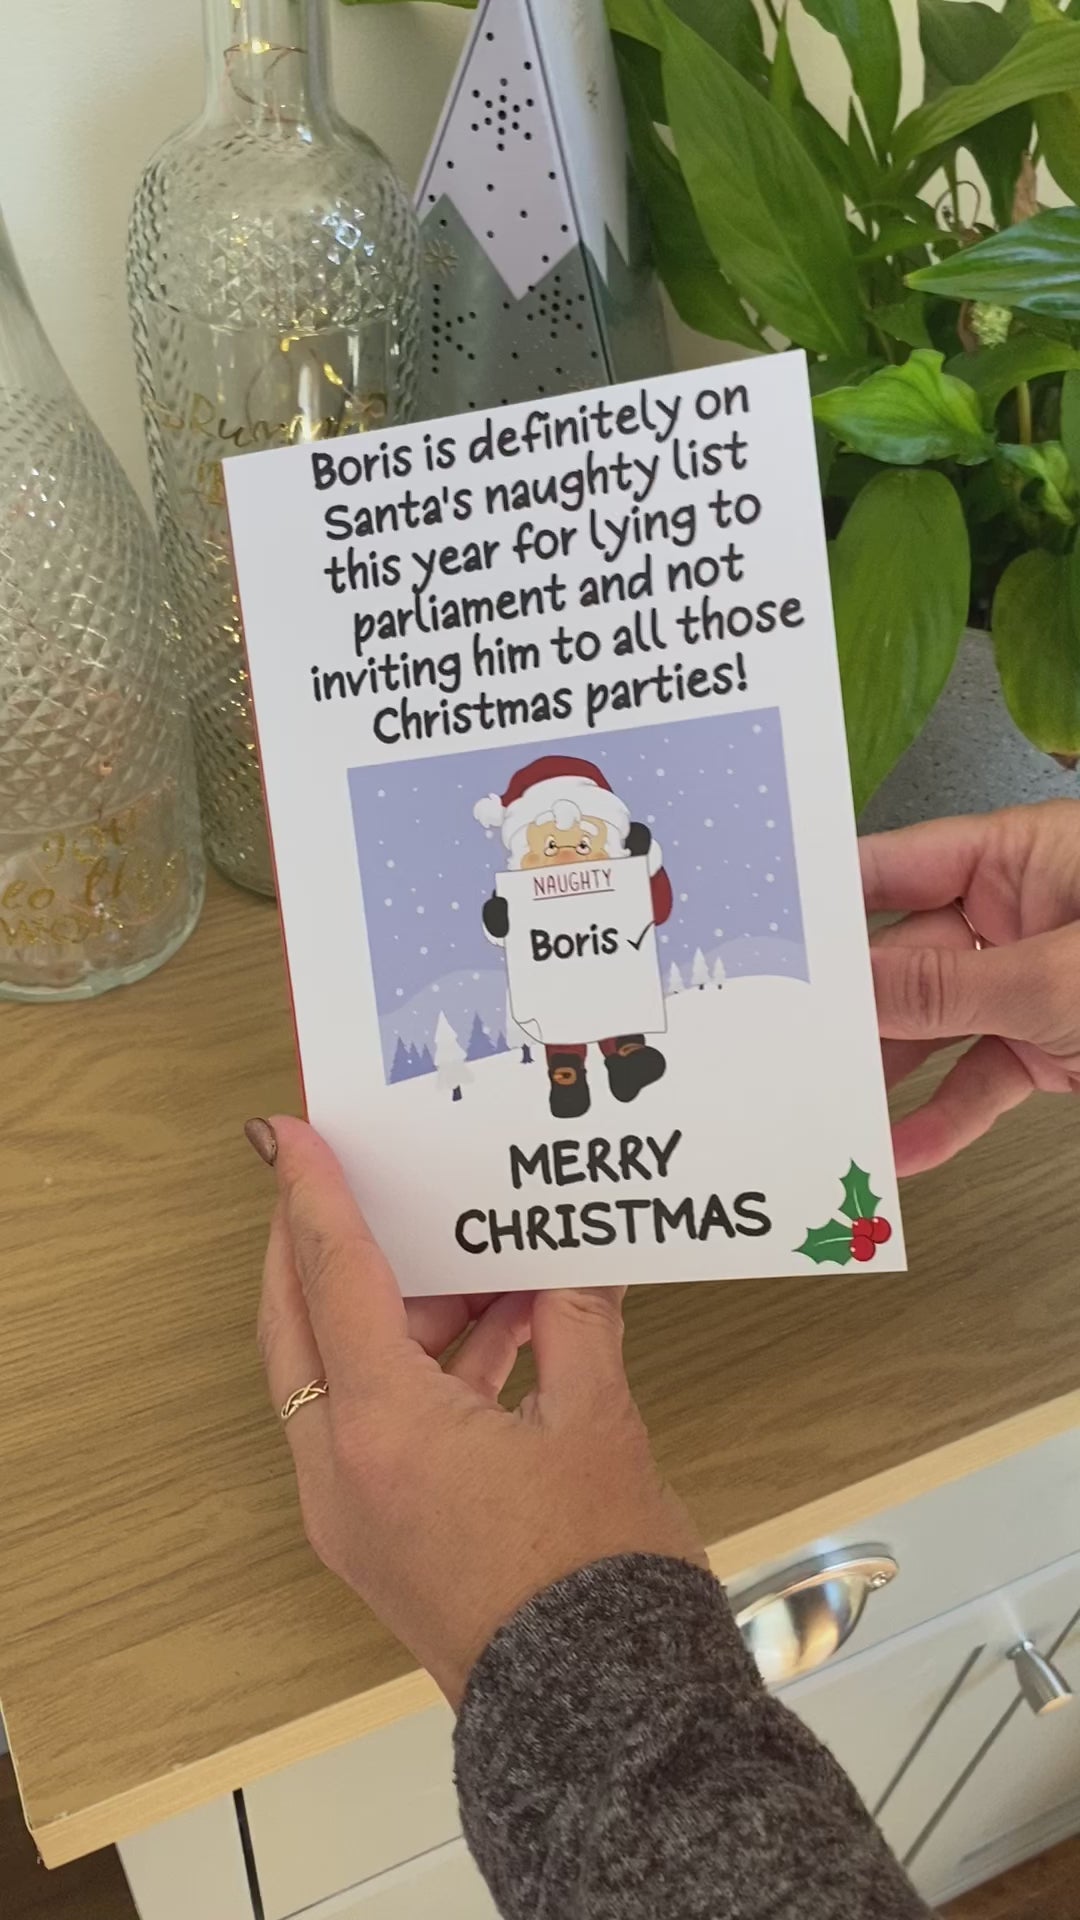 Video of Christmas Card featuring Boris and joke that he's on Santa's naughty list for not inviting him to Christmas Parties and lying to parliament.